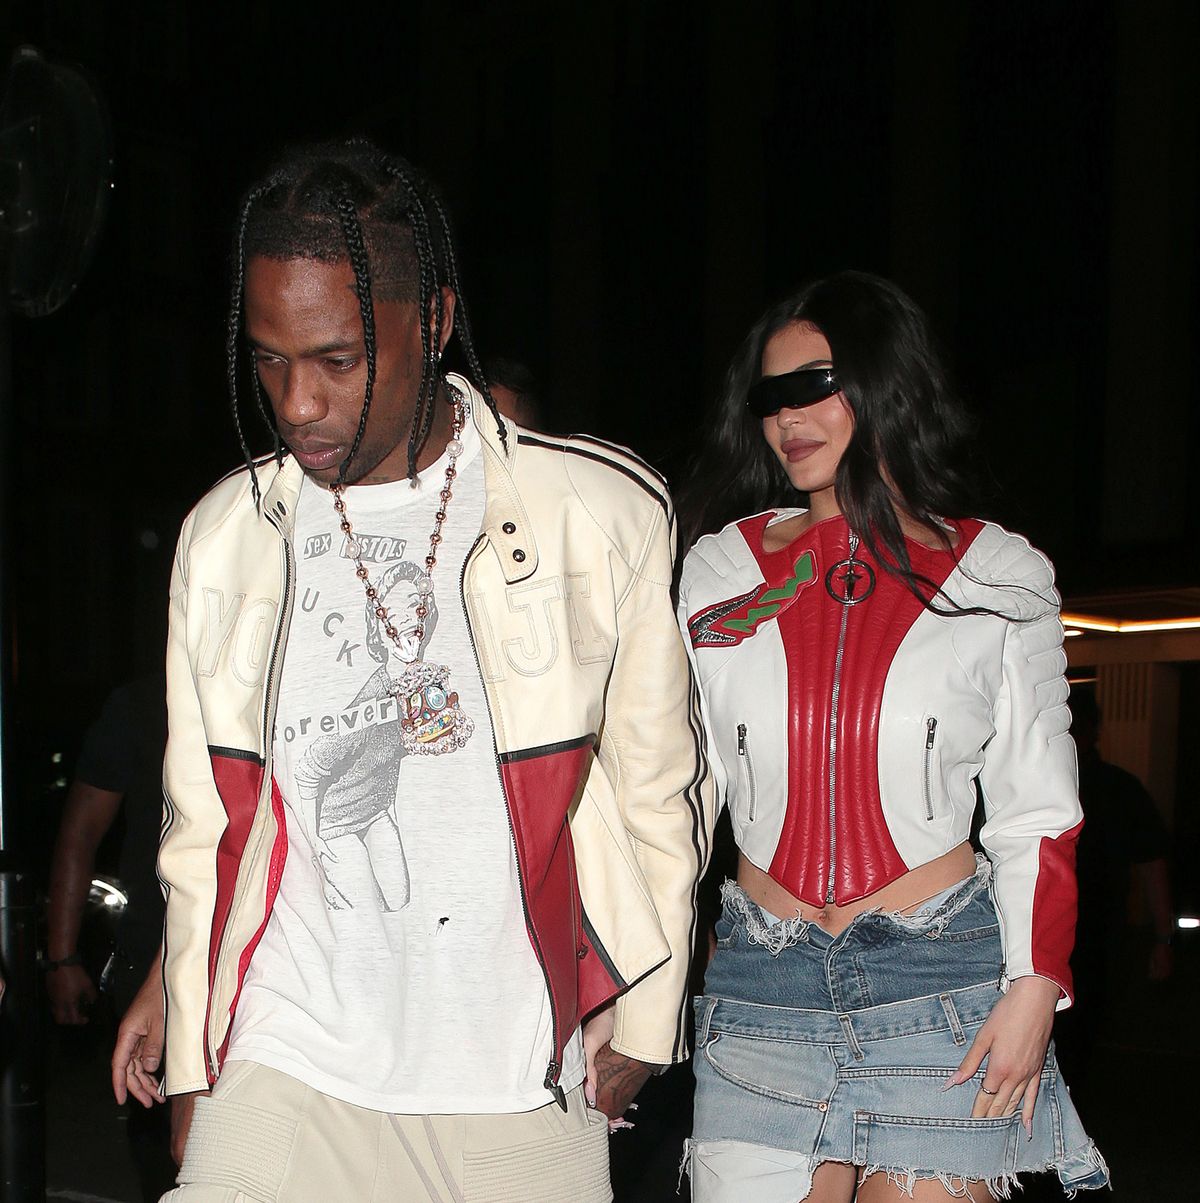 Travis Scott (and Every Other Celebrity) Wore This Watch This Week